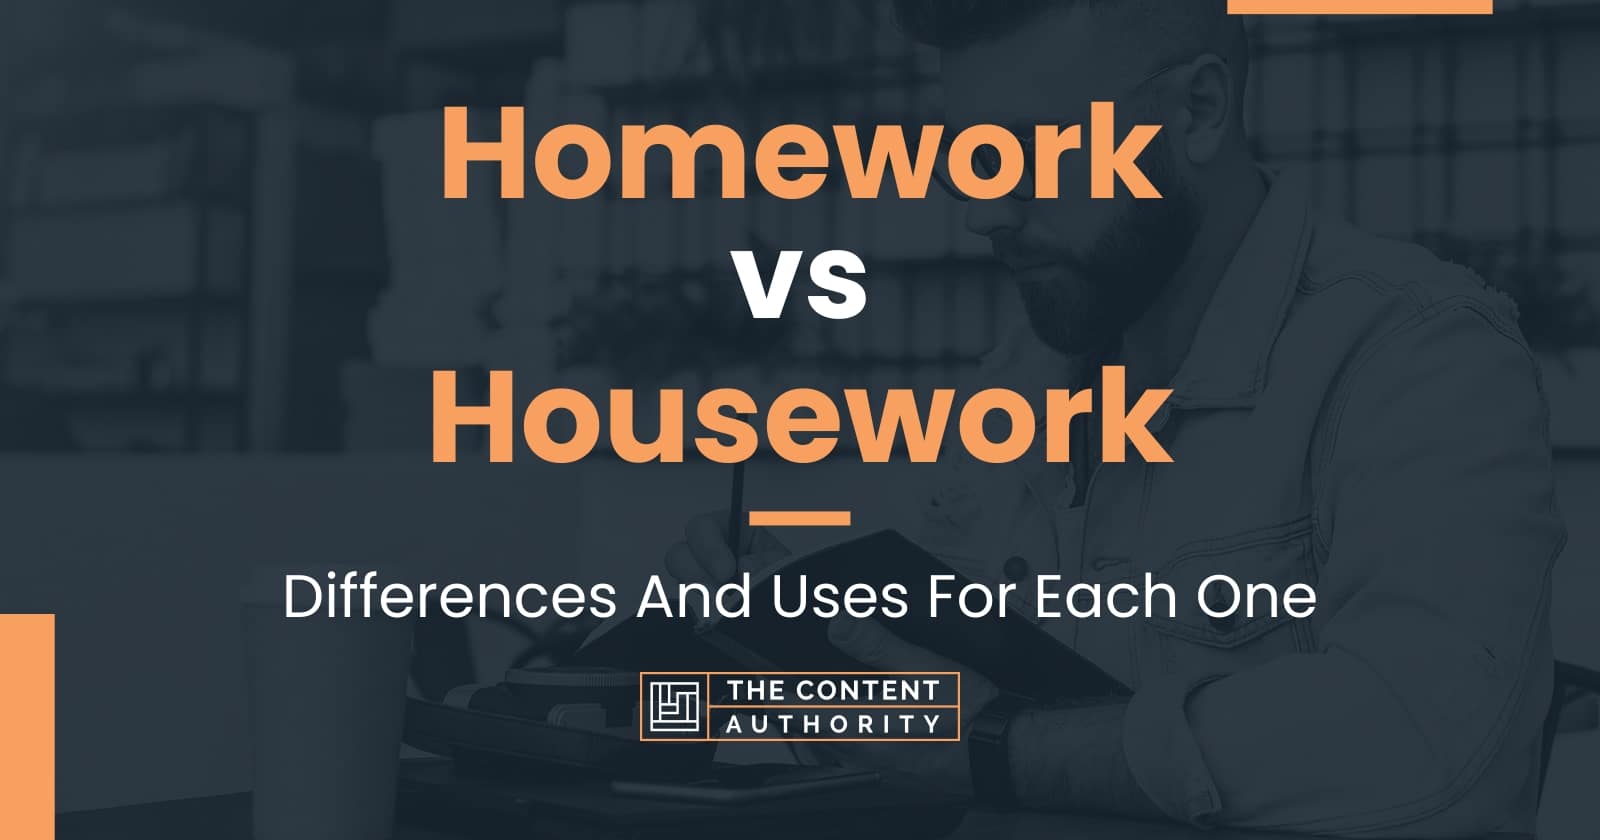 the differences between homework and housework